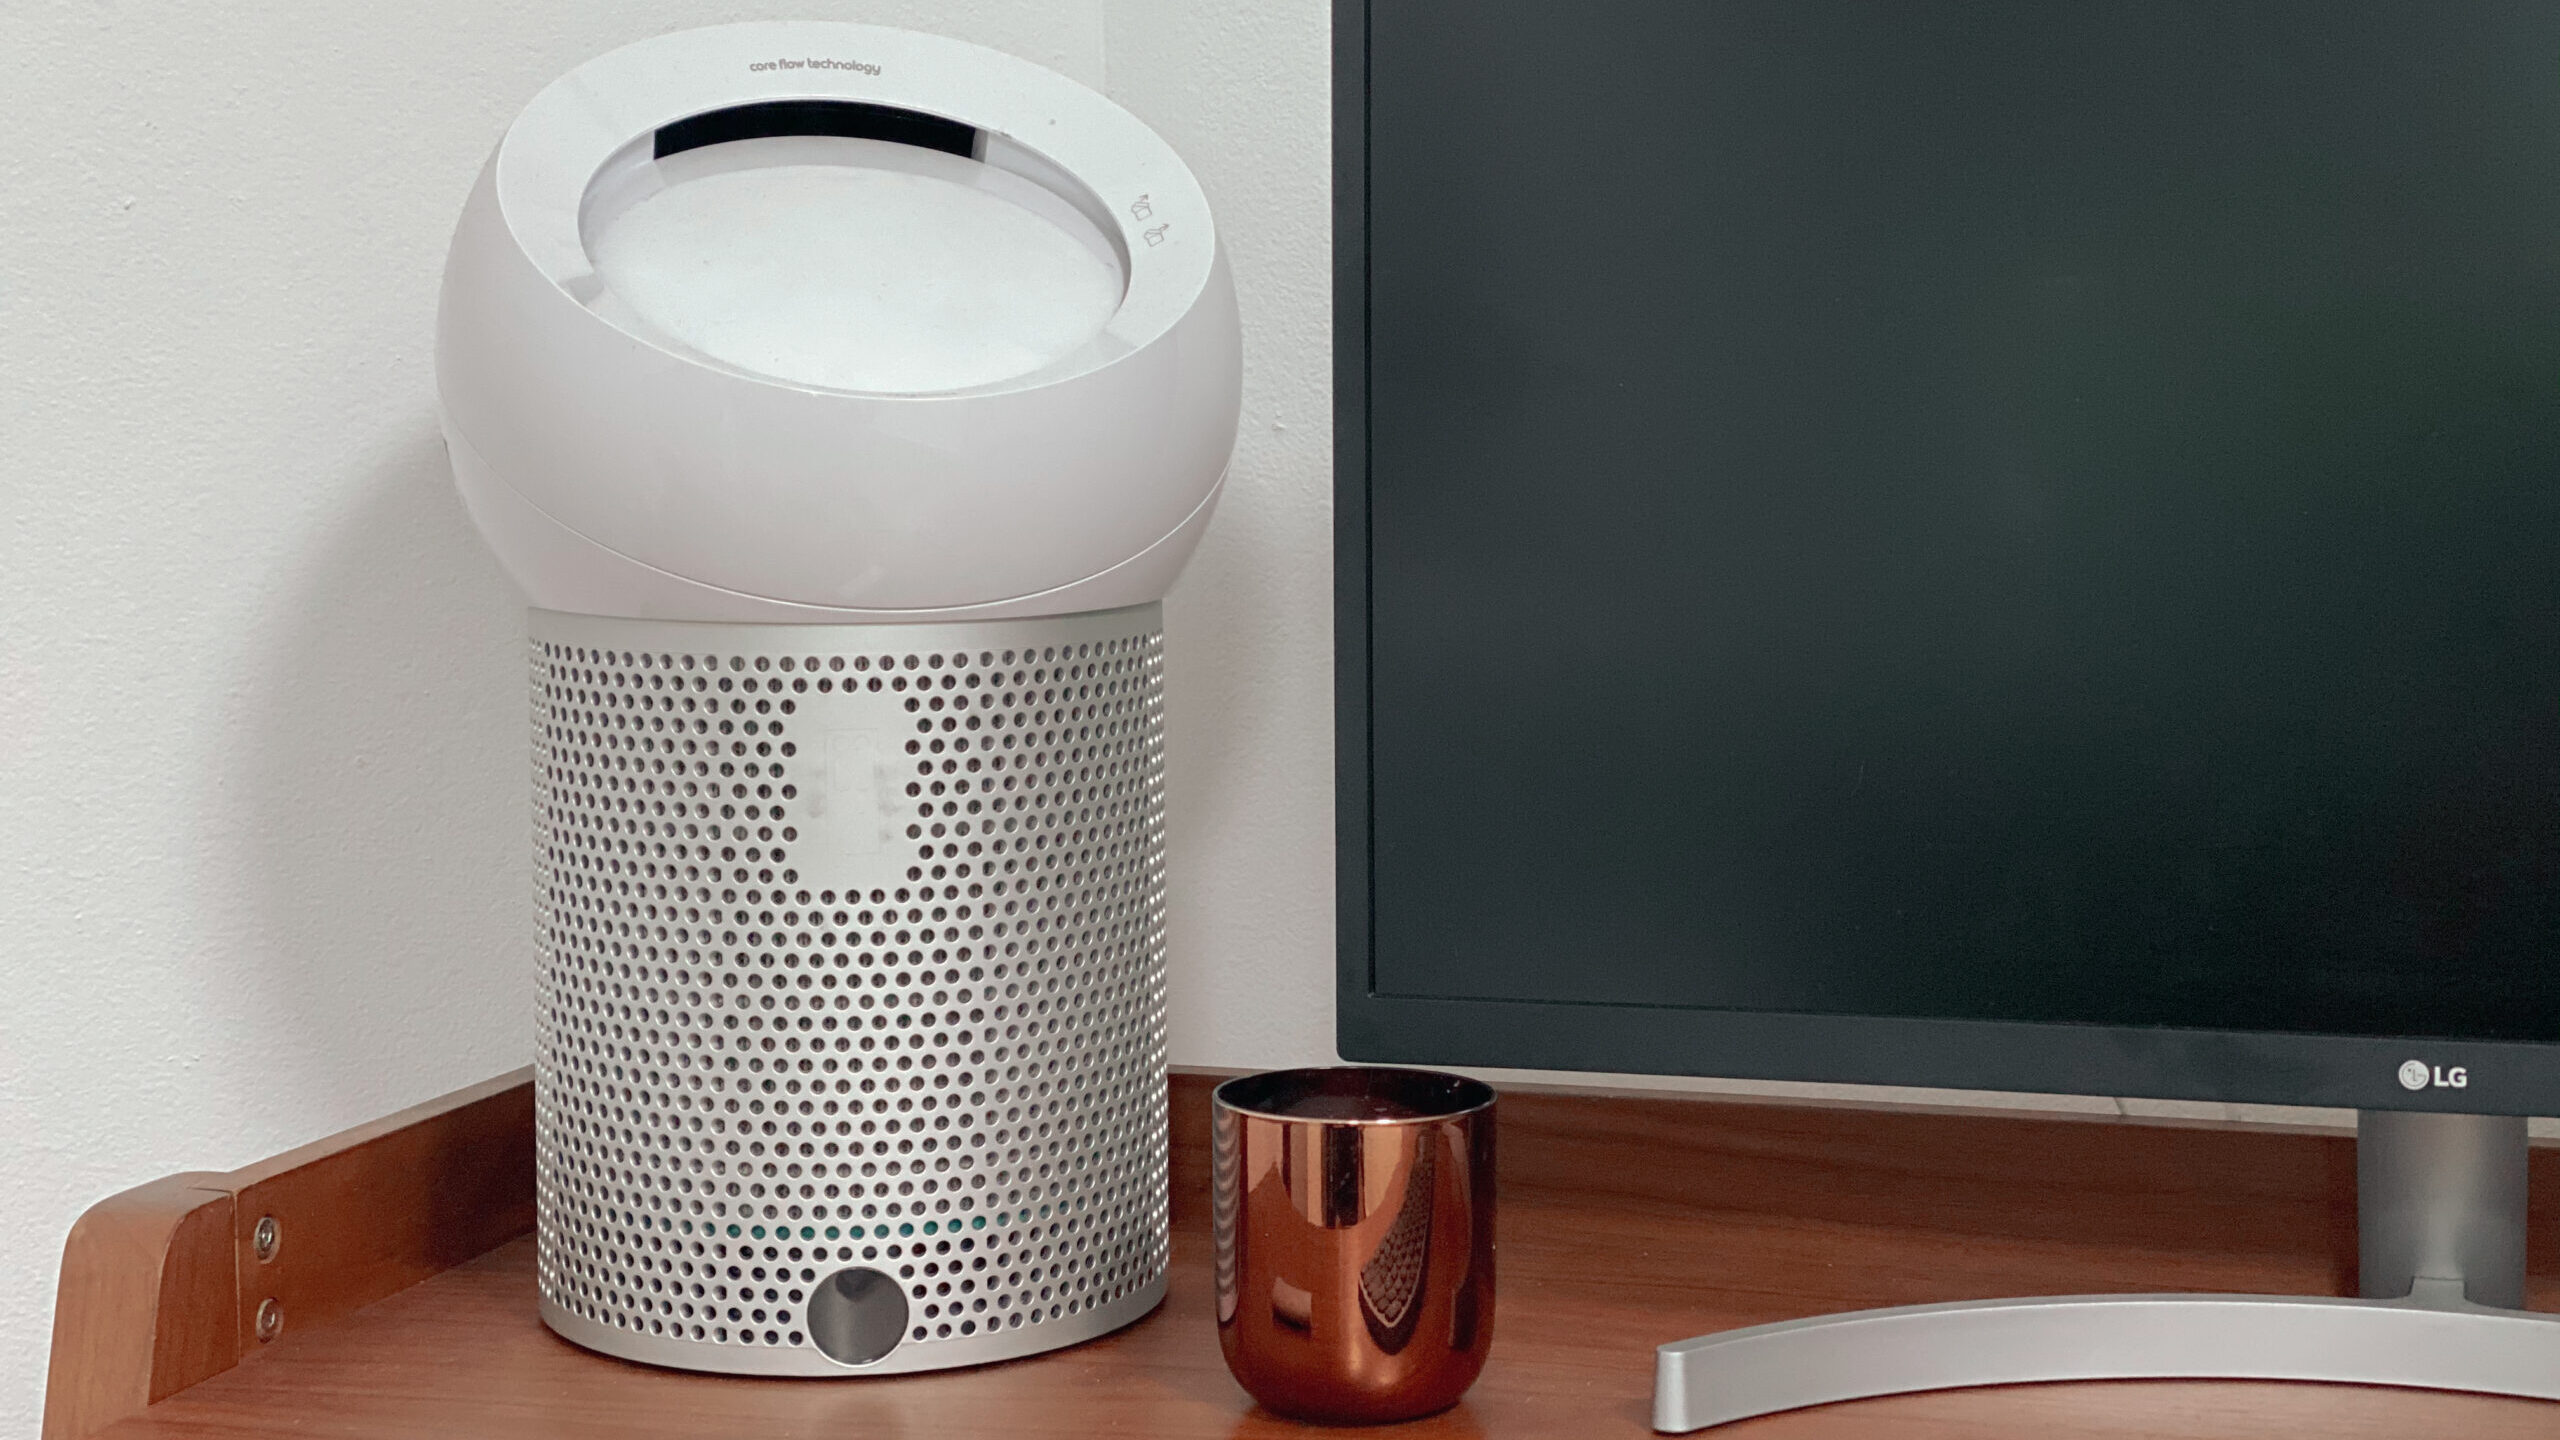 Dyson Cool Me personal purifying fan next to a candle and monitor